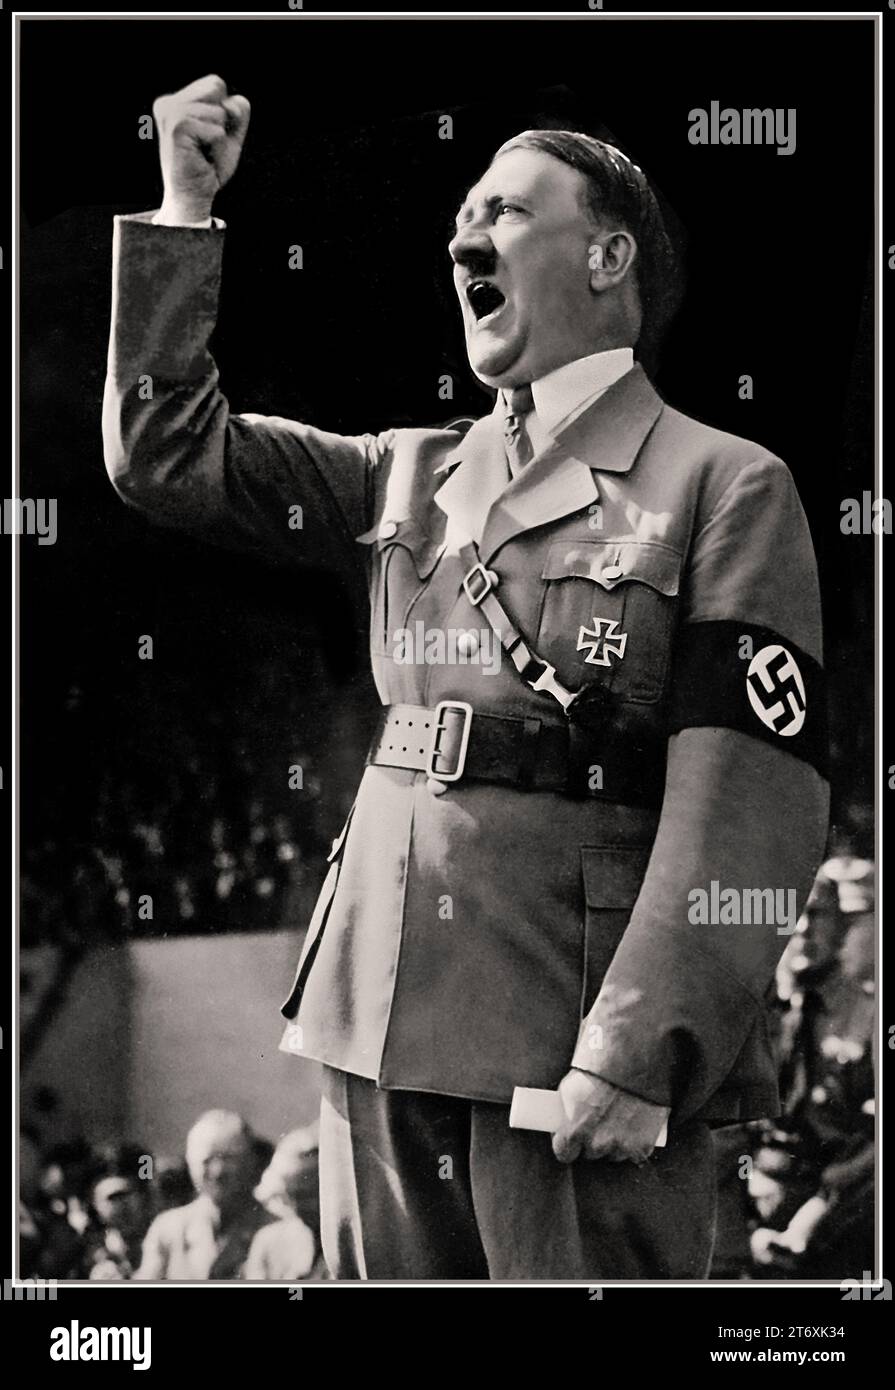 Adolf Hitler speech, leader of the Nazi Party and Fuhrer of Germany making an impassioned speech with his fist clenched, wearing military uniform with Iron Cross and Swastika armband. The day on which he became commander in chief of Nazi Germanys armed forces.  Nazi Germany 1934 Stock Photo